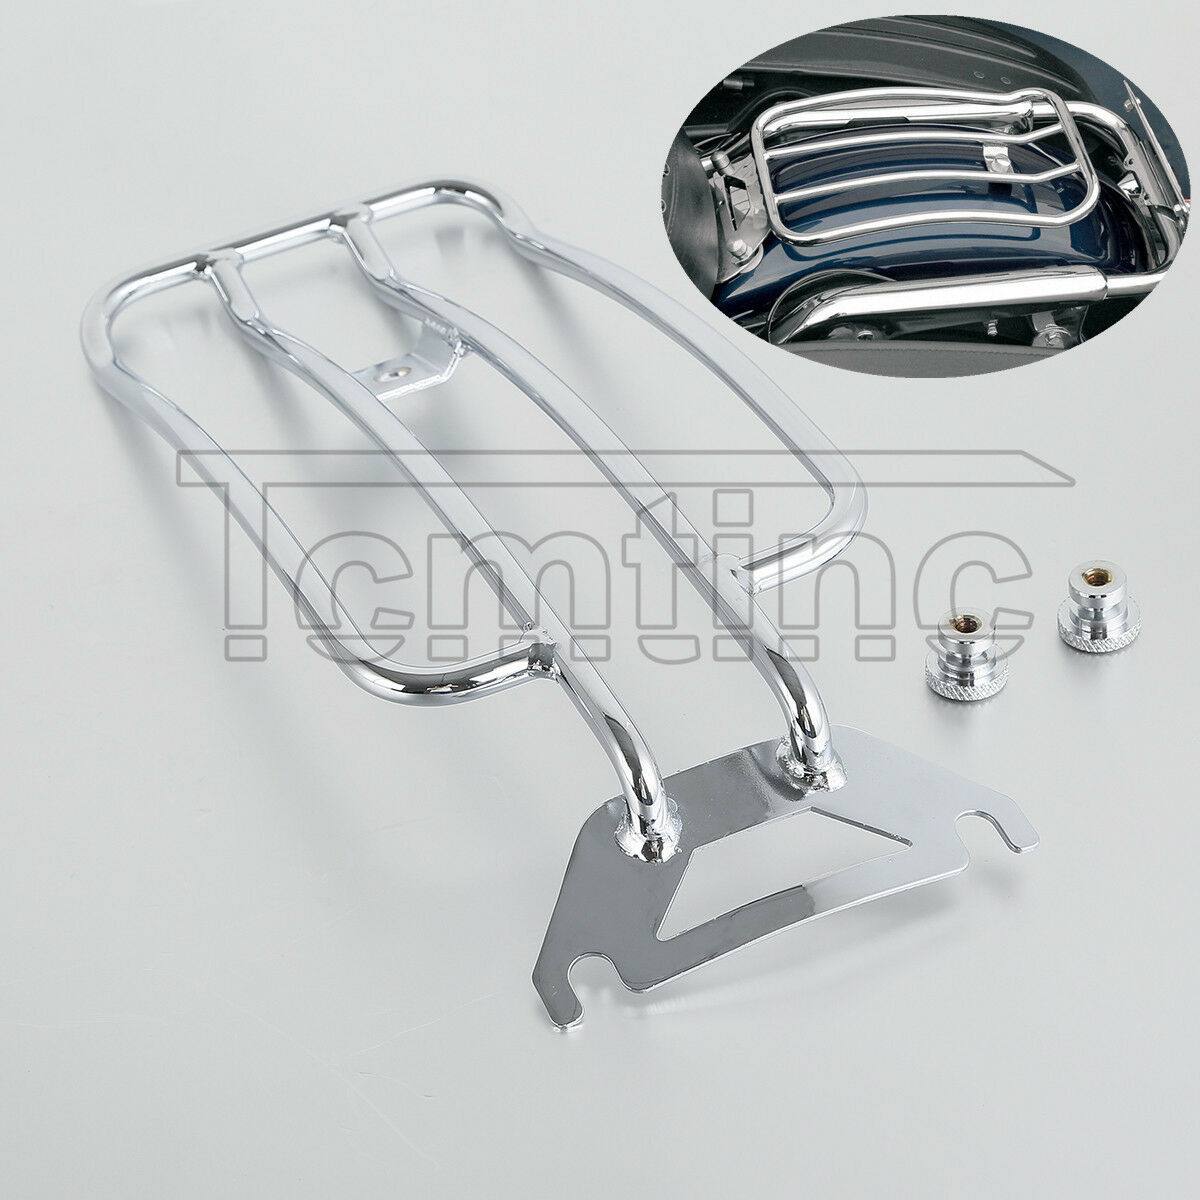 Solo Seat Luggage Rack Chrome Fit For Harley Touring Road King Classic 1998-2020 - Moto Life Products